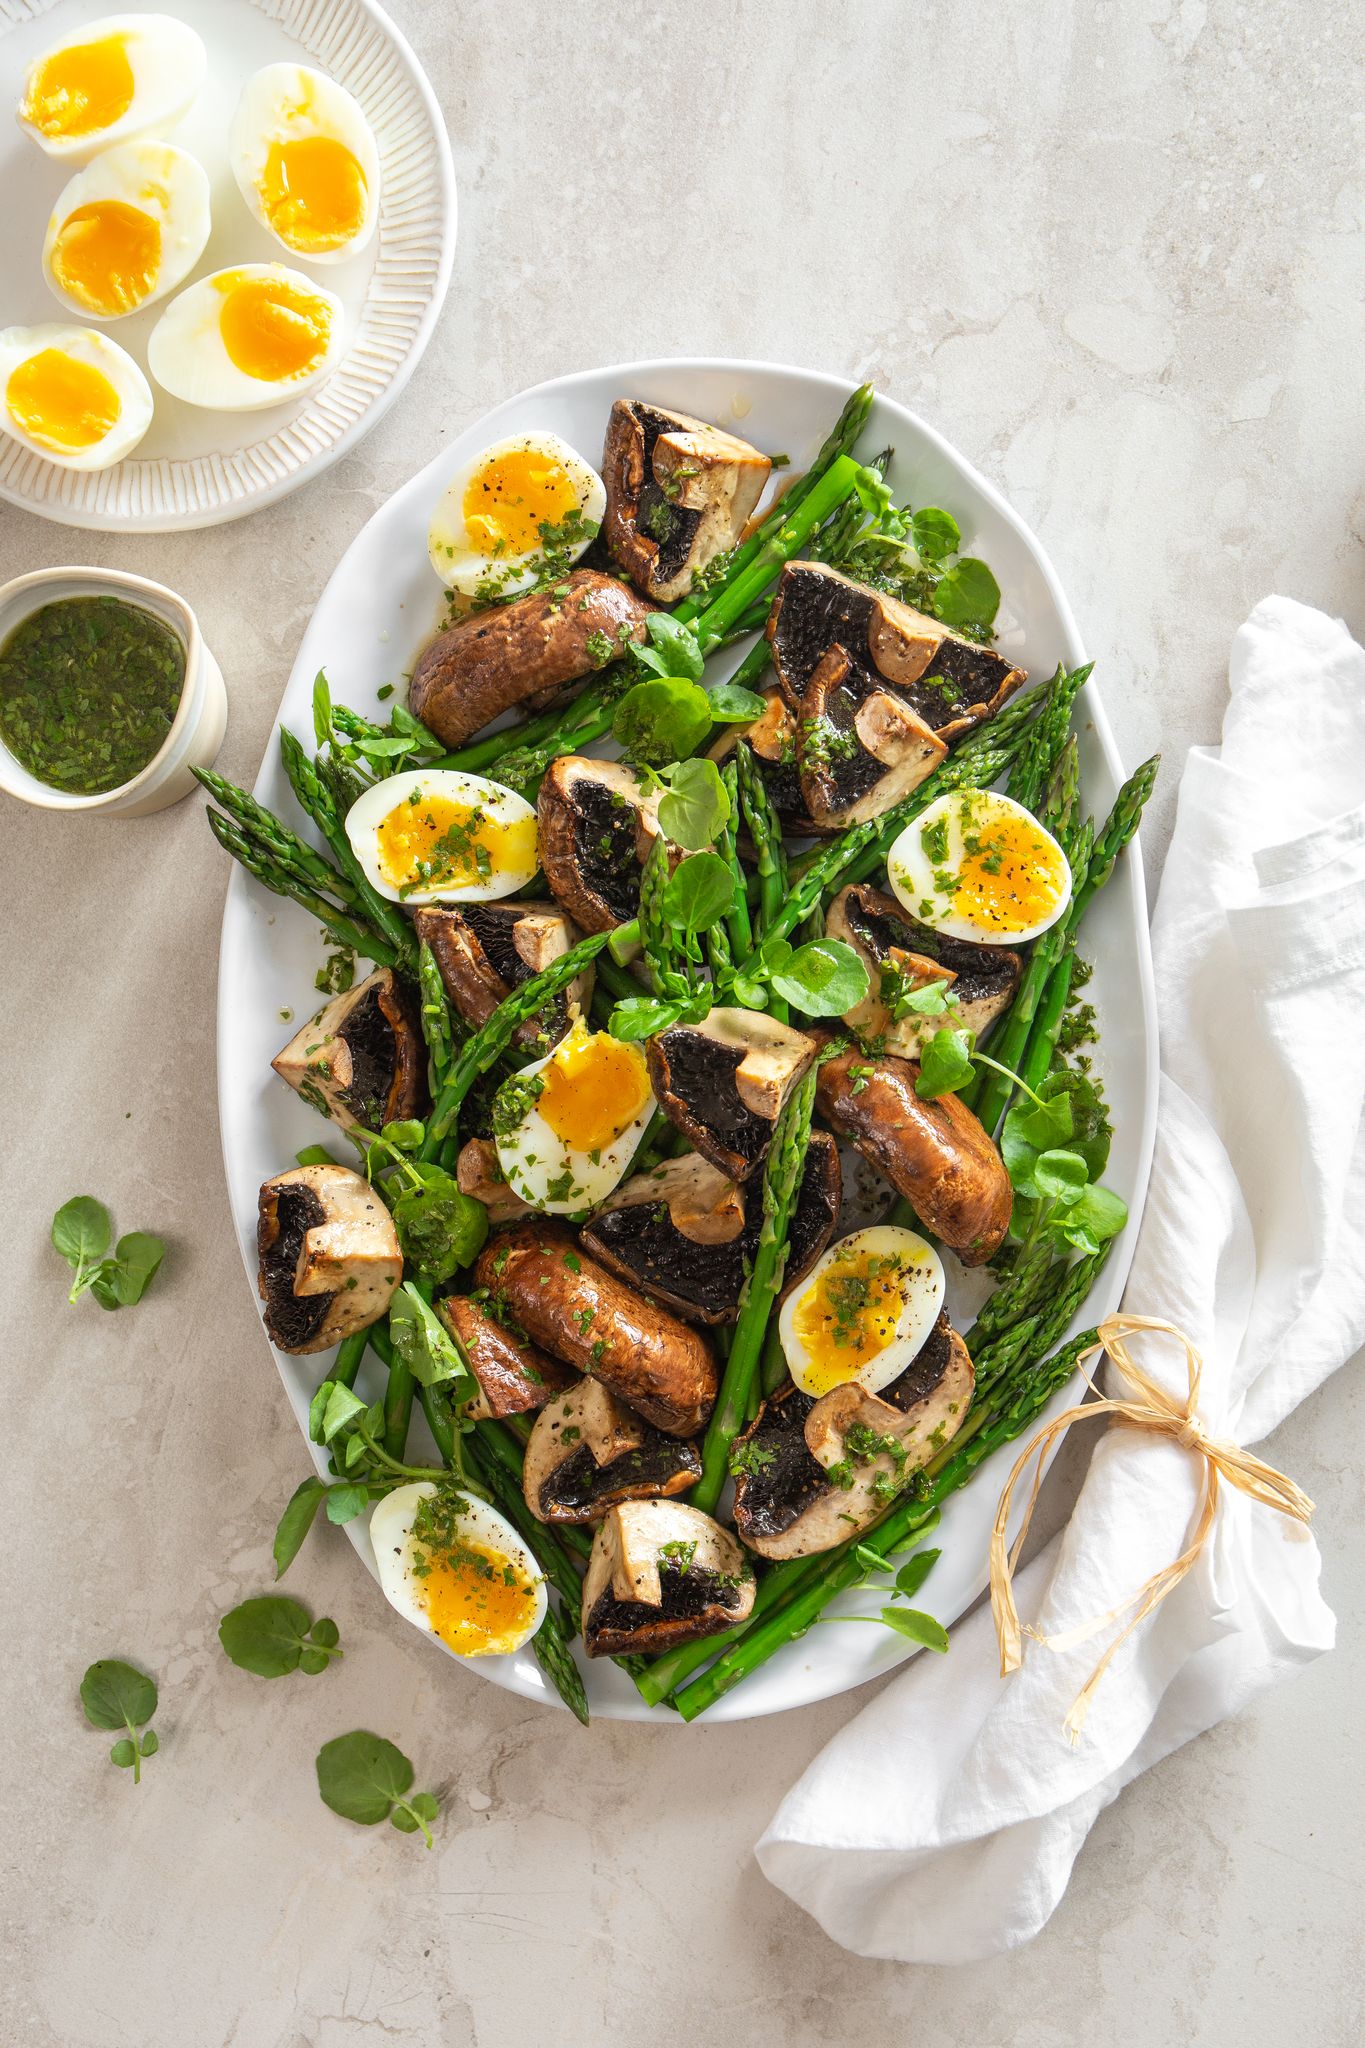 You are currently viewing <strong>Roasted Mushrooms & Asparagus with Soft Boiled Eggs and Herb Vinaigrette</strong>